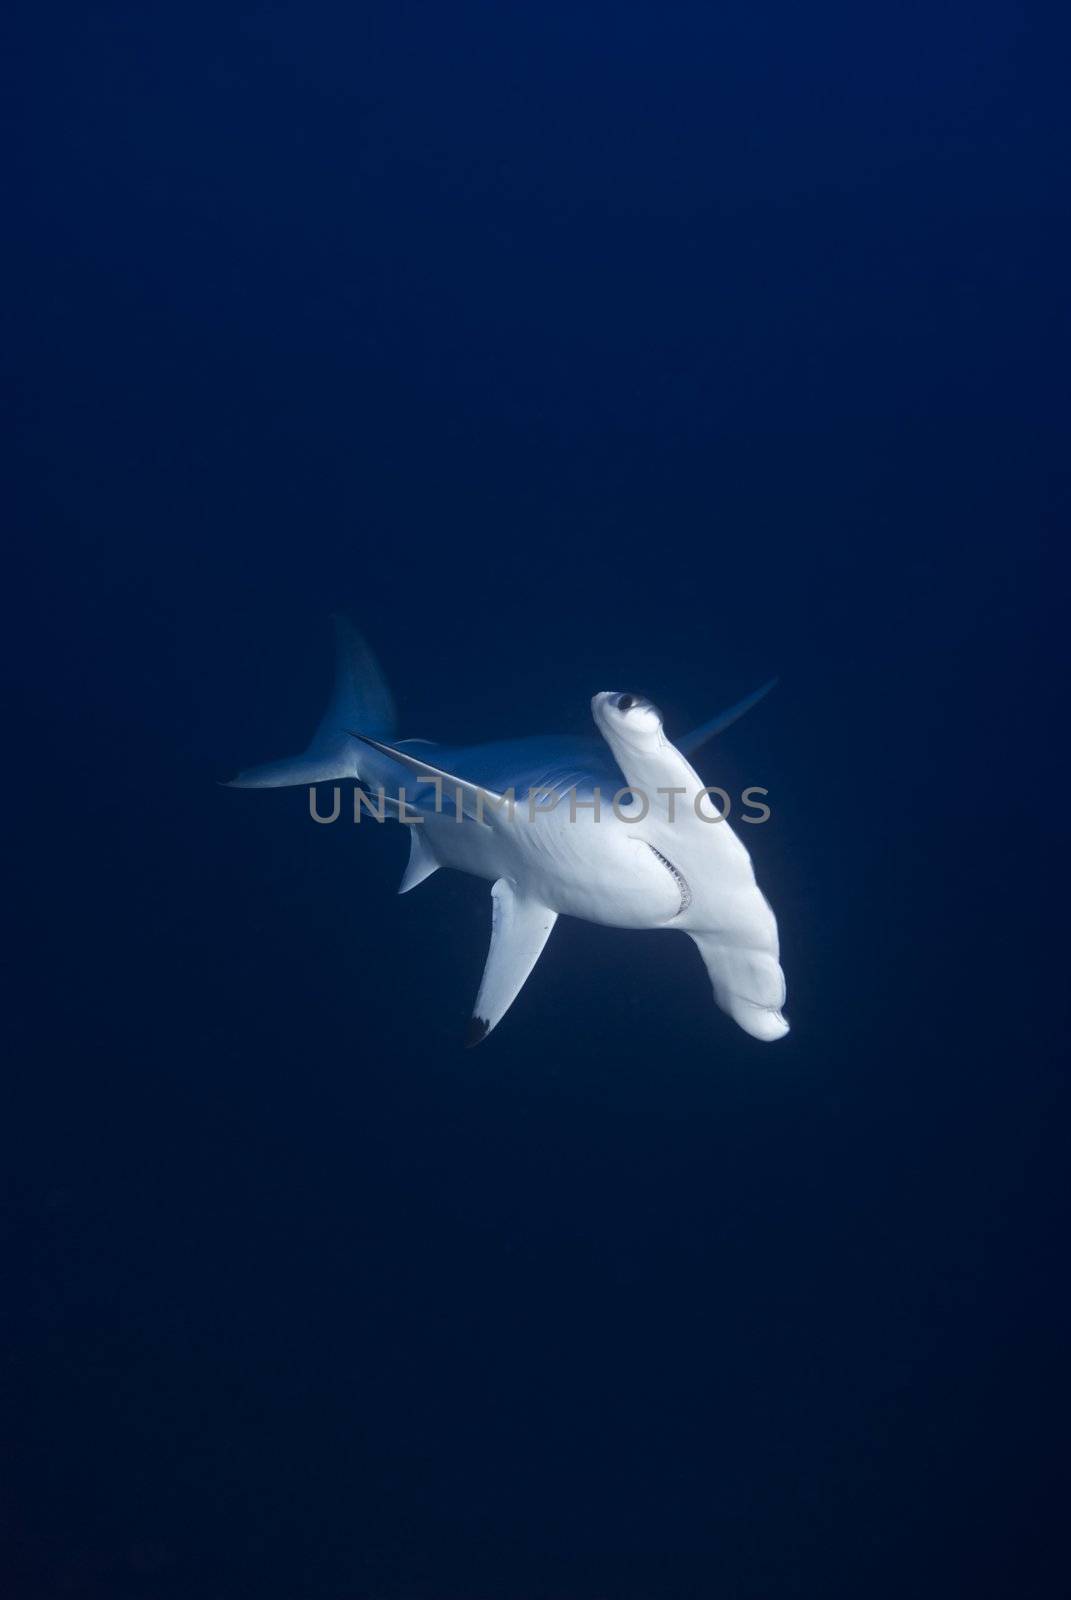 Front view of a Hammerhead shark by markdoherty